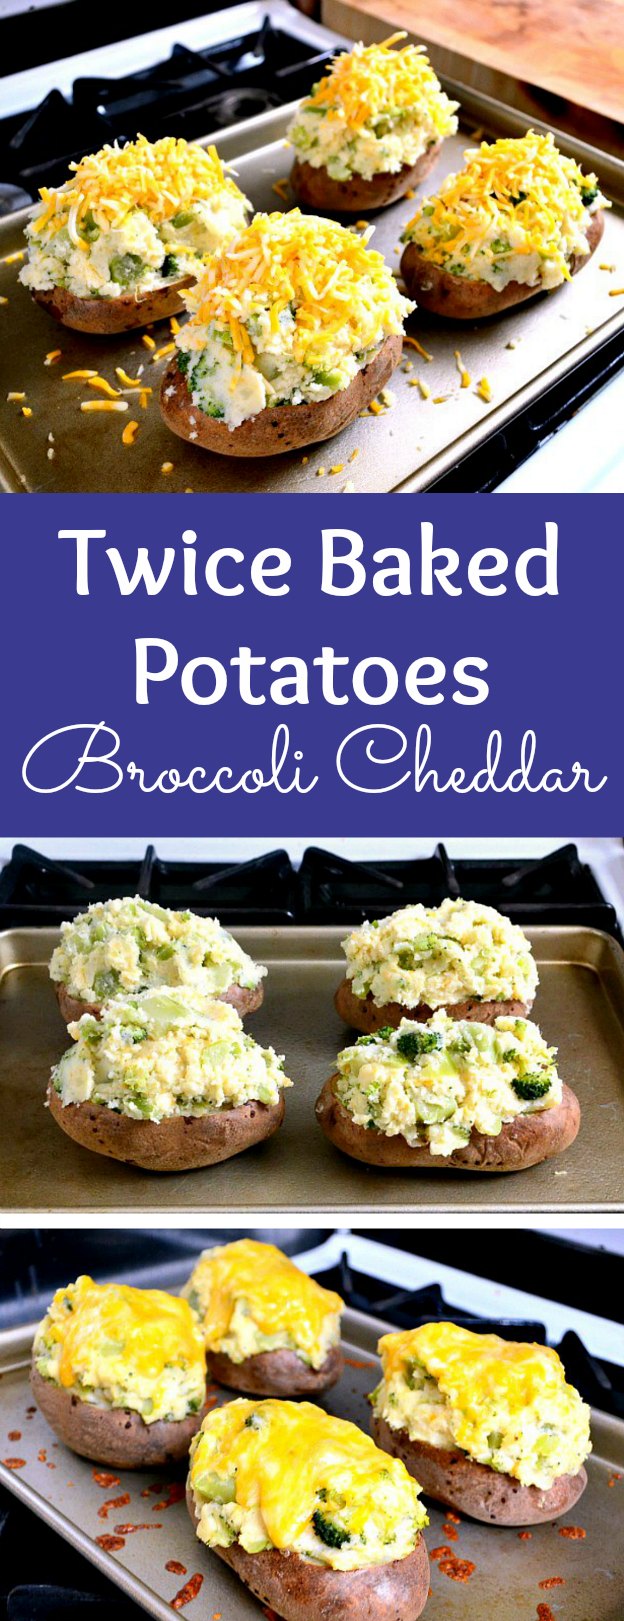 How to make Twice Baked Potatoes with Broccoli and Cheddar, an easy Twice Baked Potatoes recipe! Homemade stuffed potatoes you can make ahead for a vegetarian dinner or a side dish for any meal! These vegetarian Twice Baked Potatoes are loaded with broccoli and cheddar cheese. Bake these cheesy double stuffed Twice Baked Potatoes in the oven for a simple main dish! | Hello Little Home #potatoes #twicebakedpotatoes #stuffedpotatoes #bakedpotato #vegetarianrecipes #cheesy #broccoli #cheddar